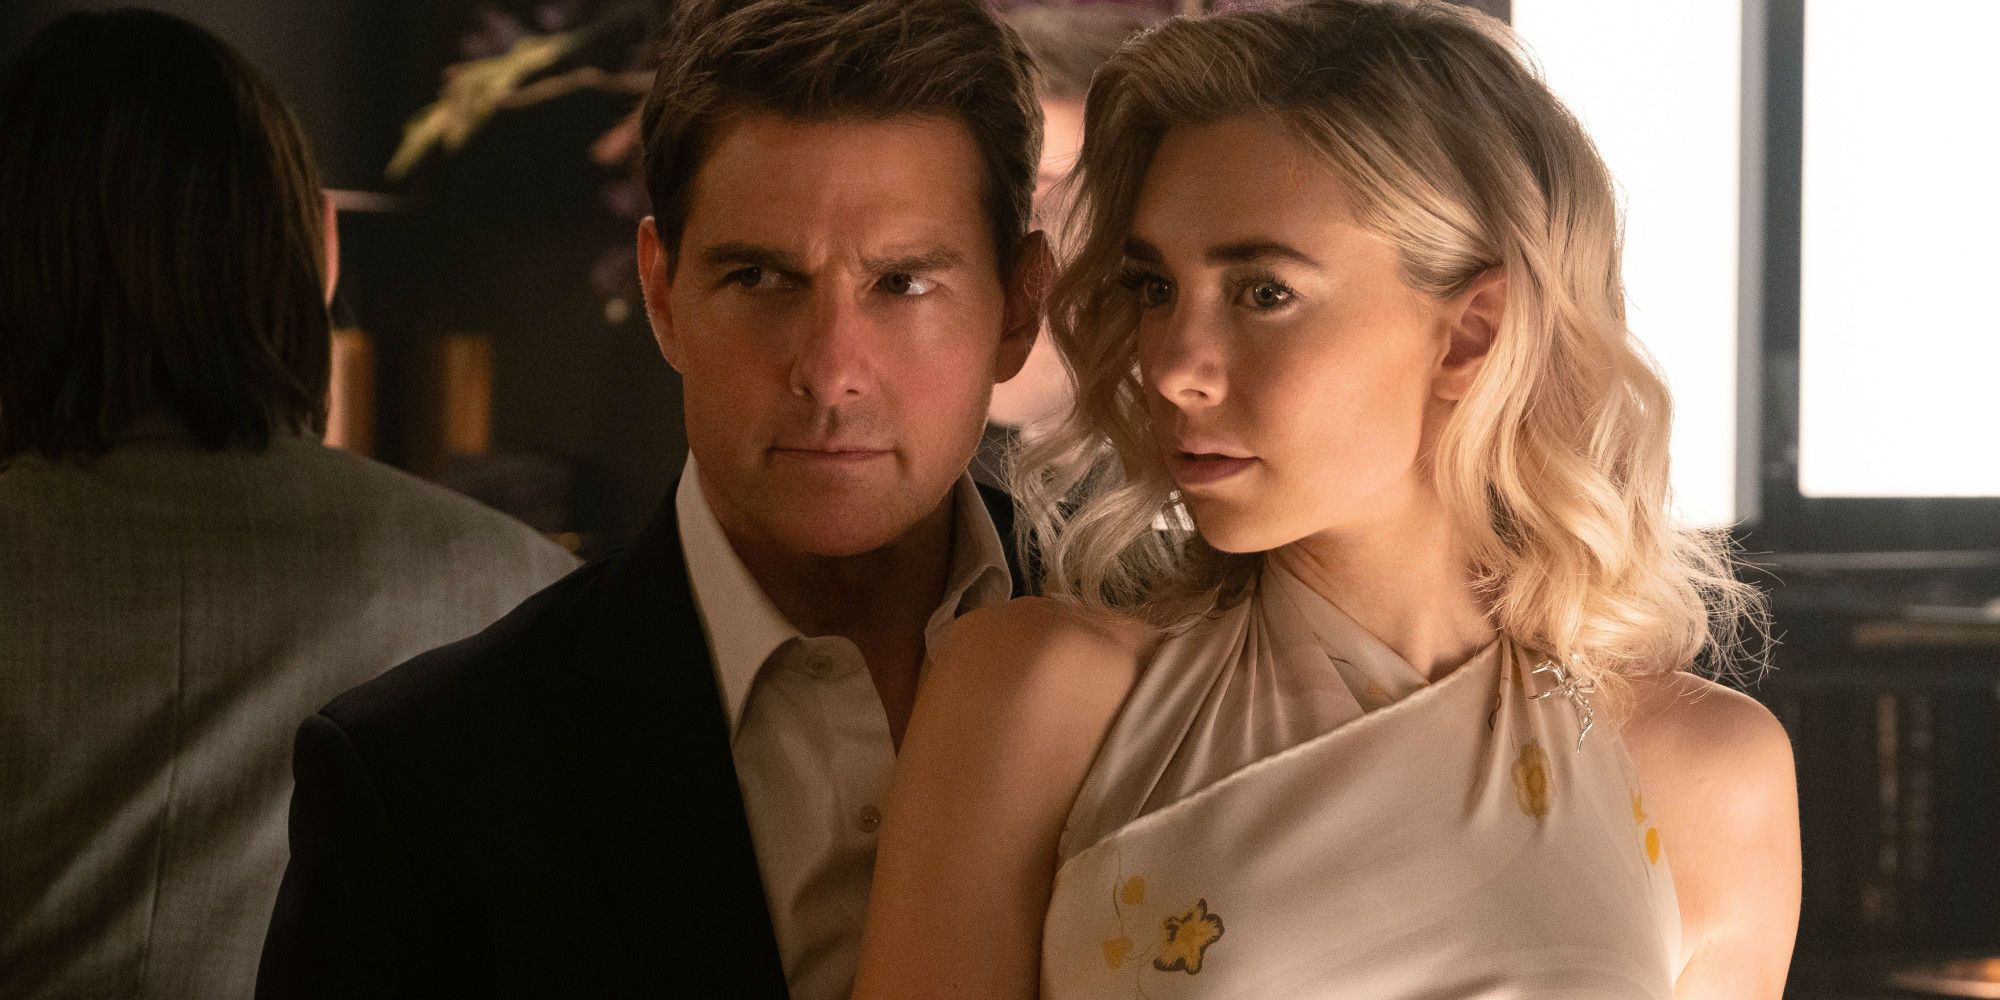 Ethan and the White Widow stand close in Mission Impossible Fallout.